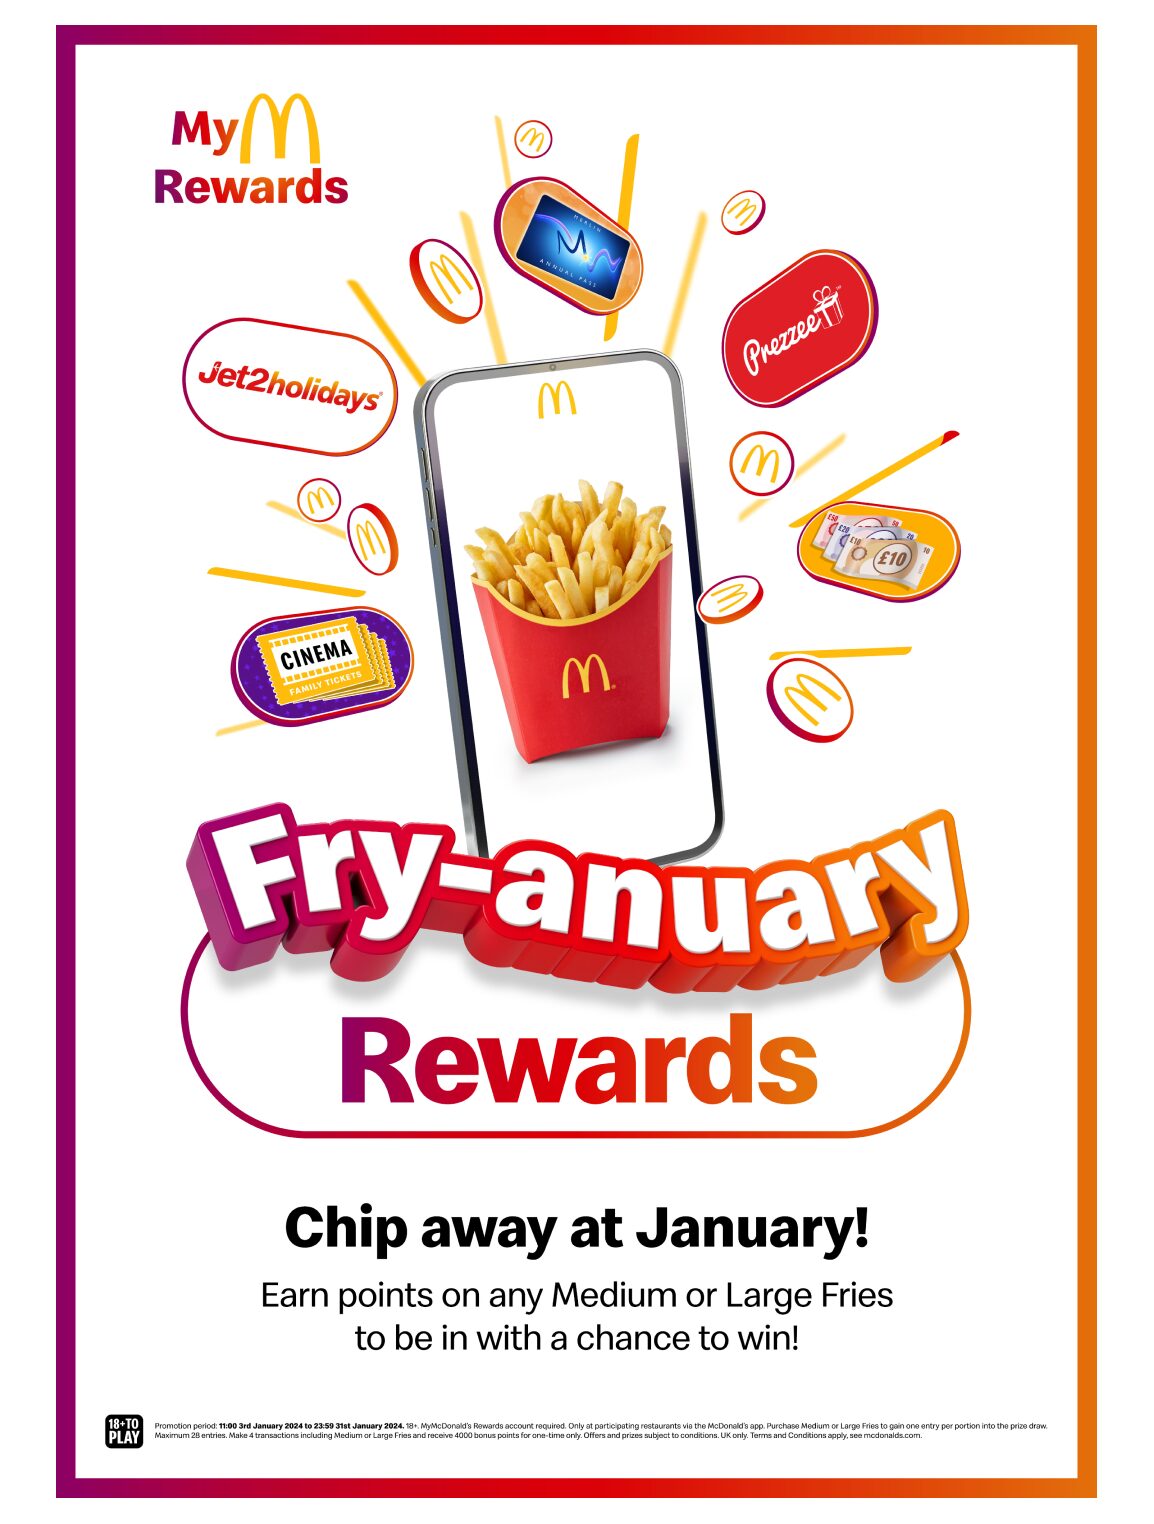 Poster of Fryanuary rewards with a phone and prizes coming out of the center